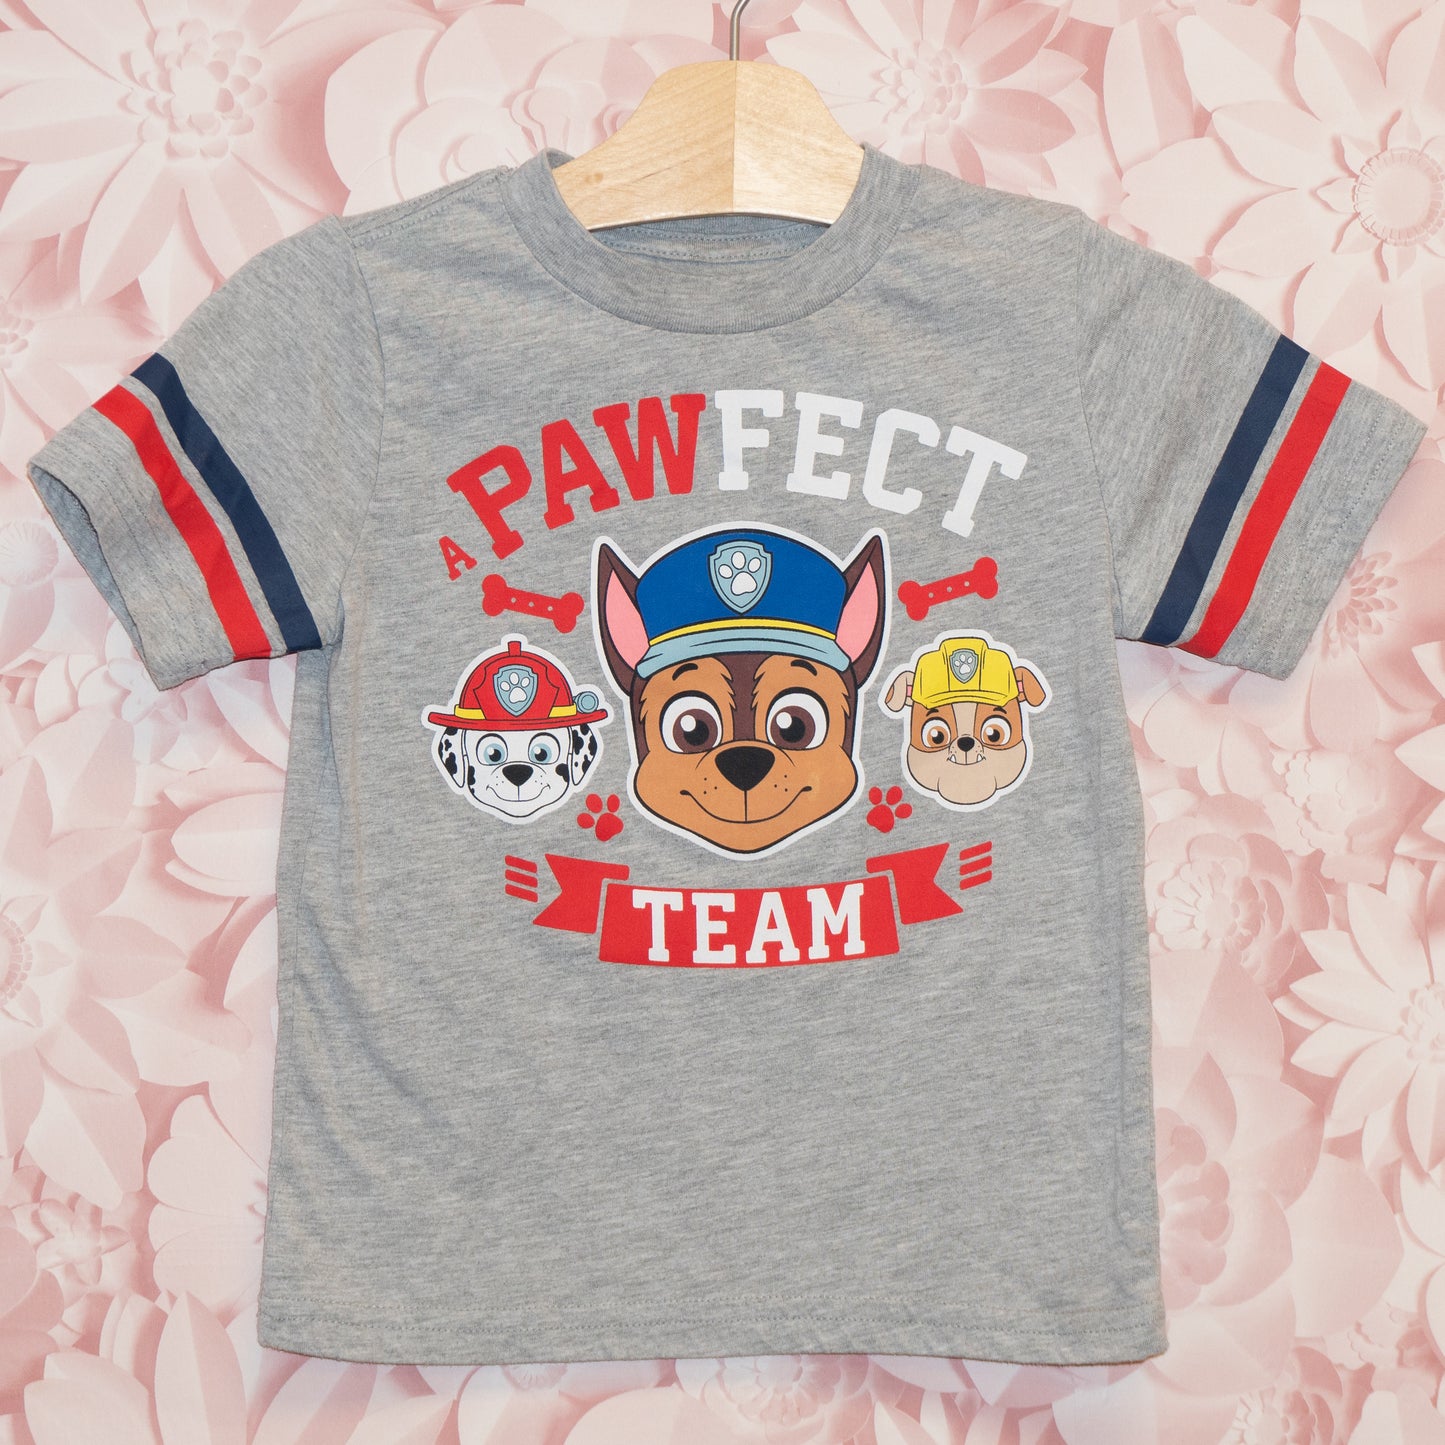 Pawfect Team Tee Size 4T